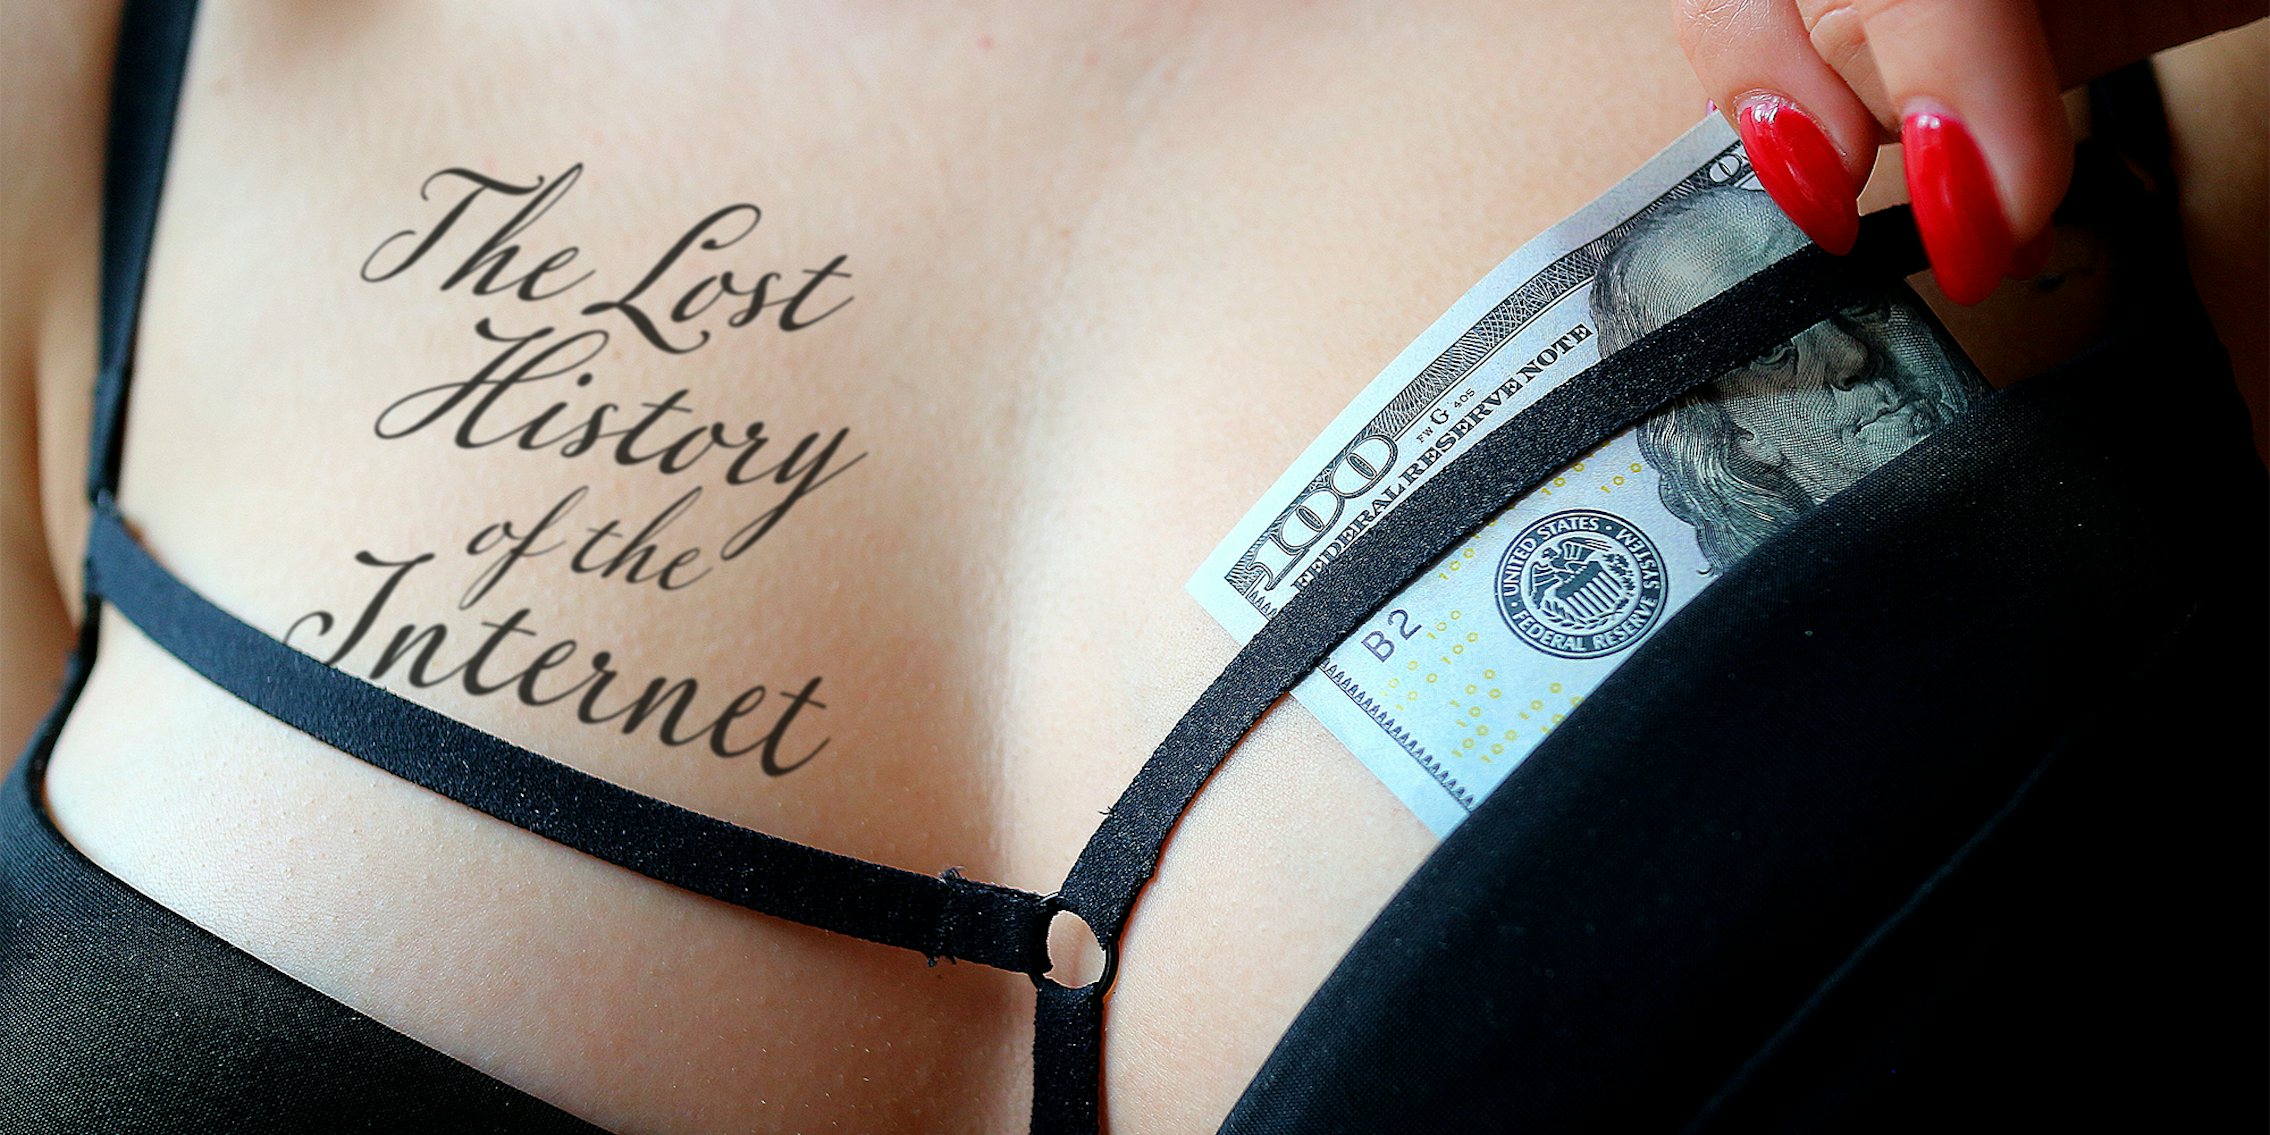 $100 bill tucked in bra of woman with 'The Lost History of the Internet' tattooed on her chest